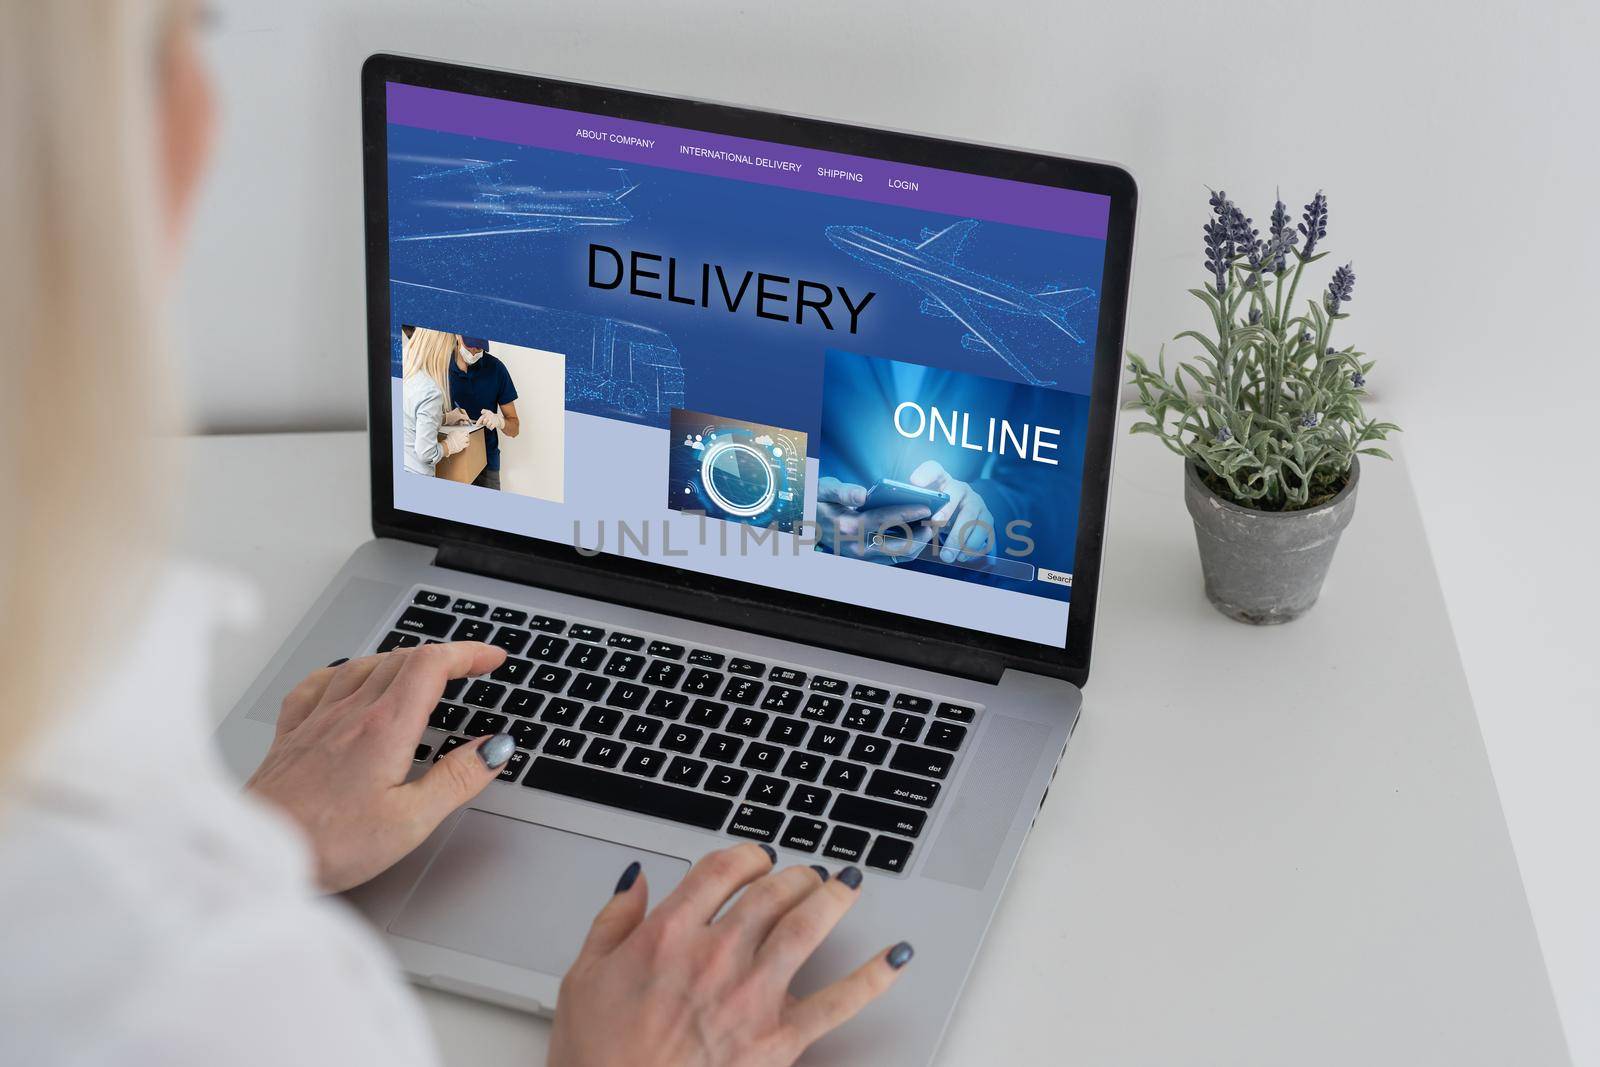 delivery icon on laptop keyboard. Online shopping, ecommerce and retail sale concept, delivery for customers ordering things from retailers websites using internet.